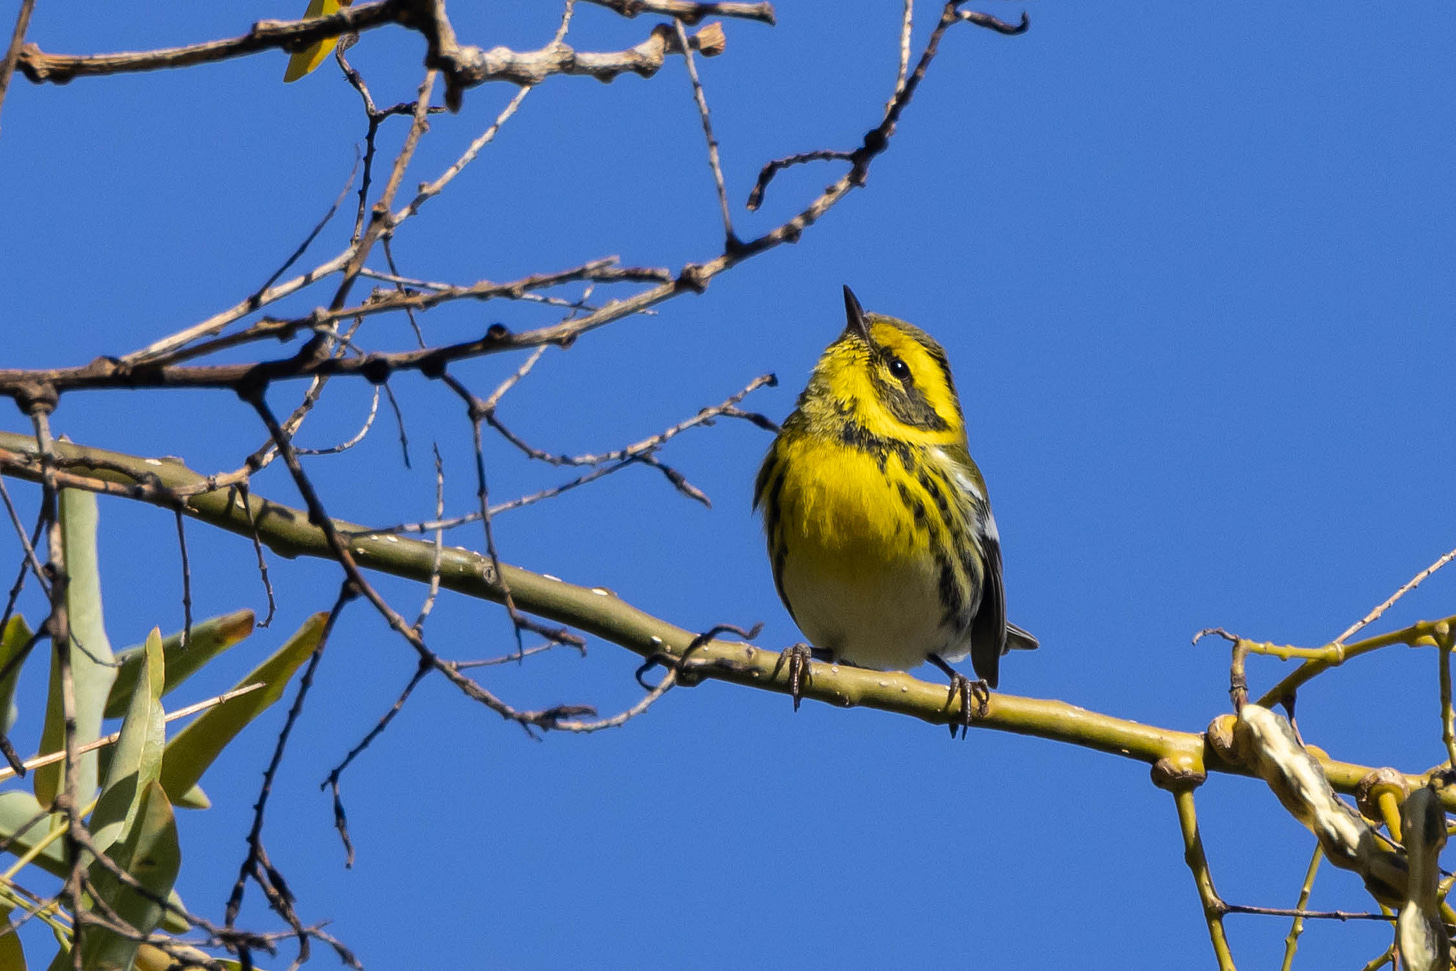 a very small bird with a yellow chest and face, dark black streaks, a black mask bordered by a yellow eyebrow and collar, and a yellow throat, perched on a thin branch against a vivid blue sky